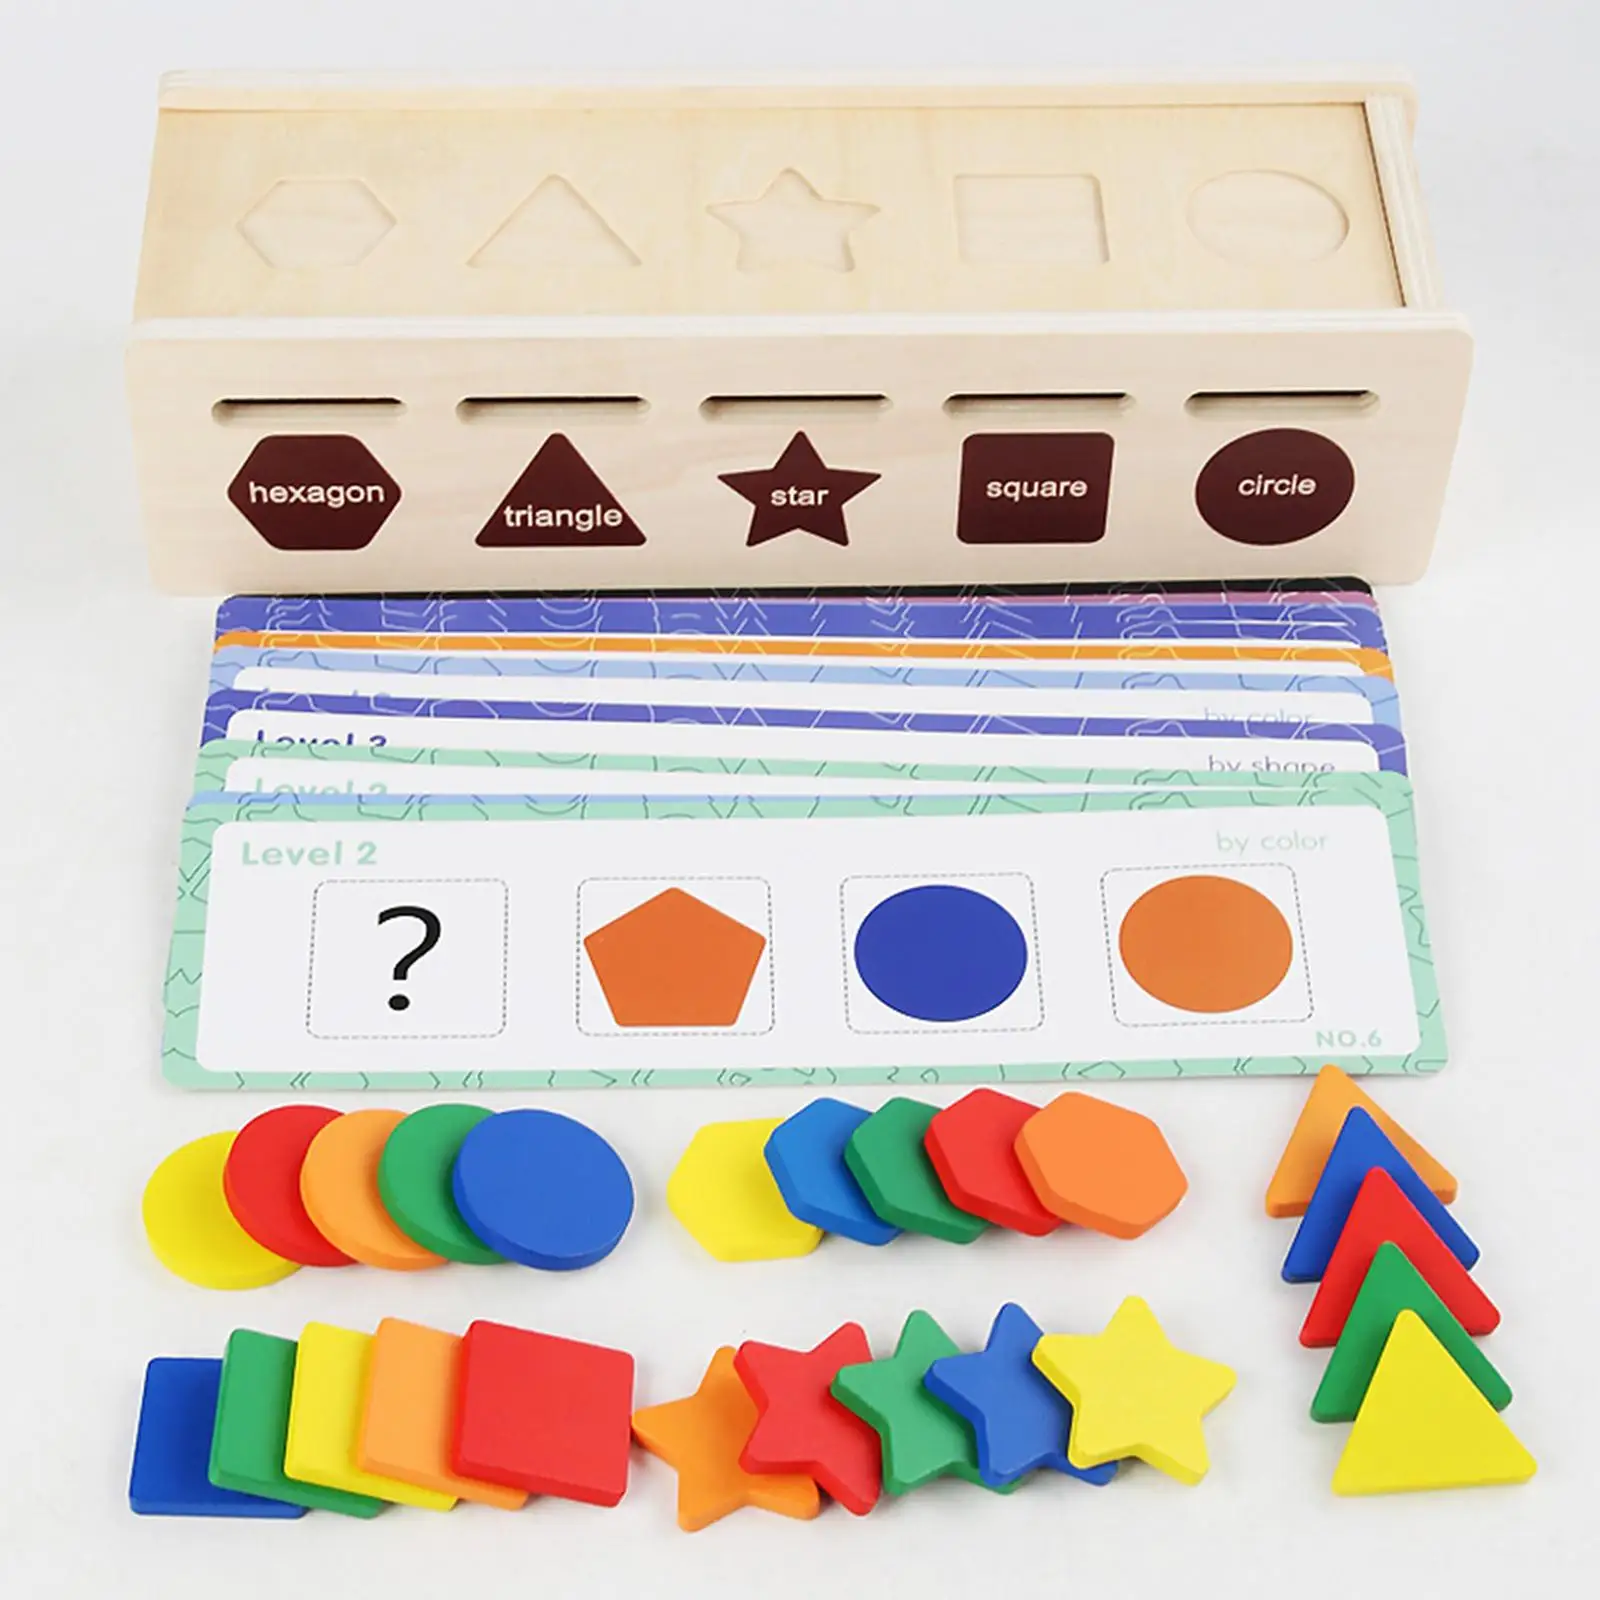 Montessori Toys Color & Shape Sorting Toy Block Puzzles Matching Box, 25 Geometric Blocks and 12 Cards for Children Kids